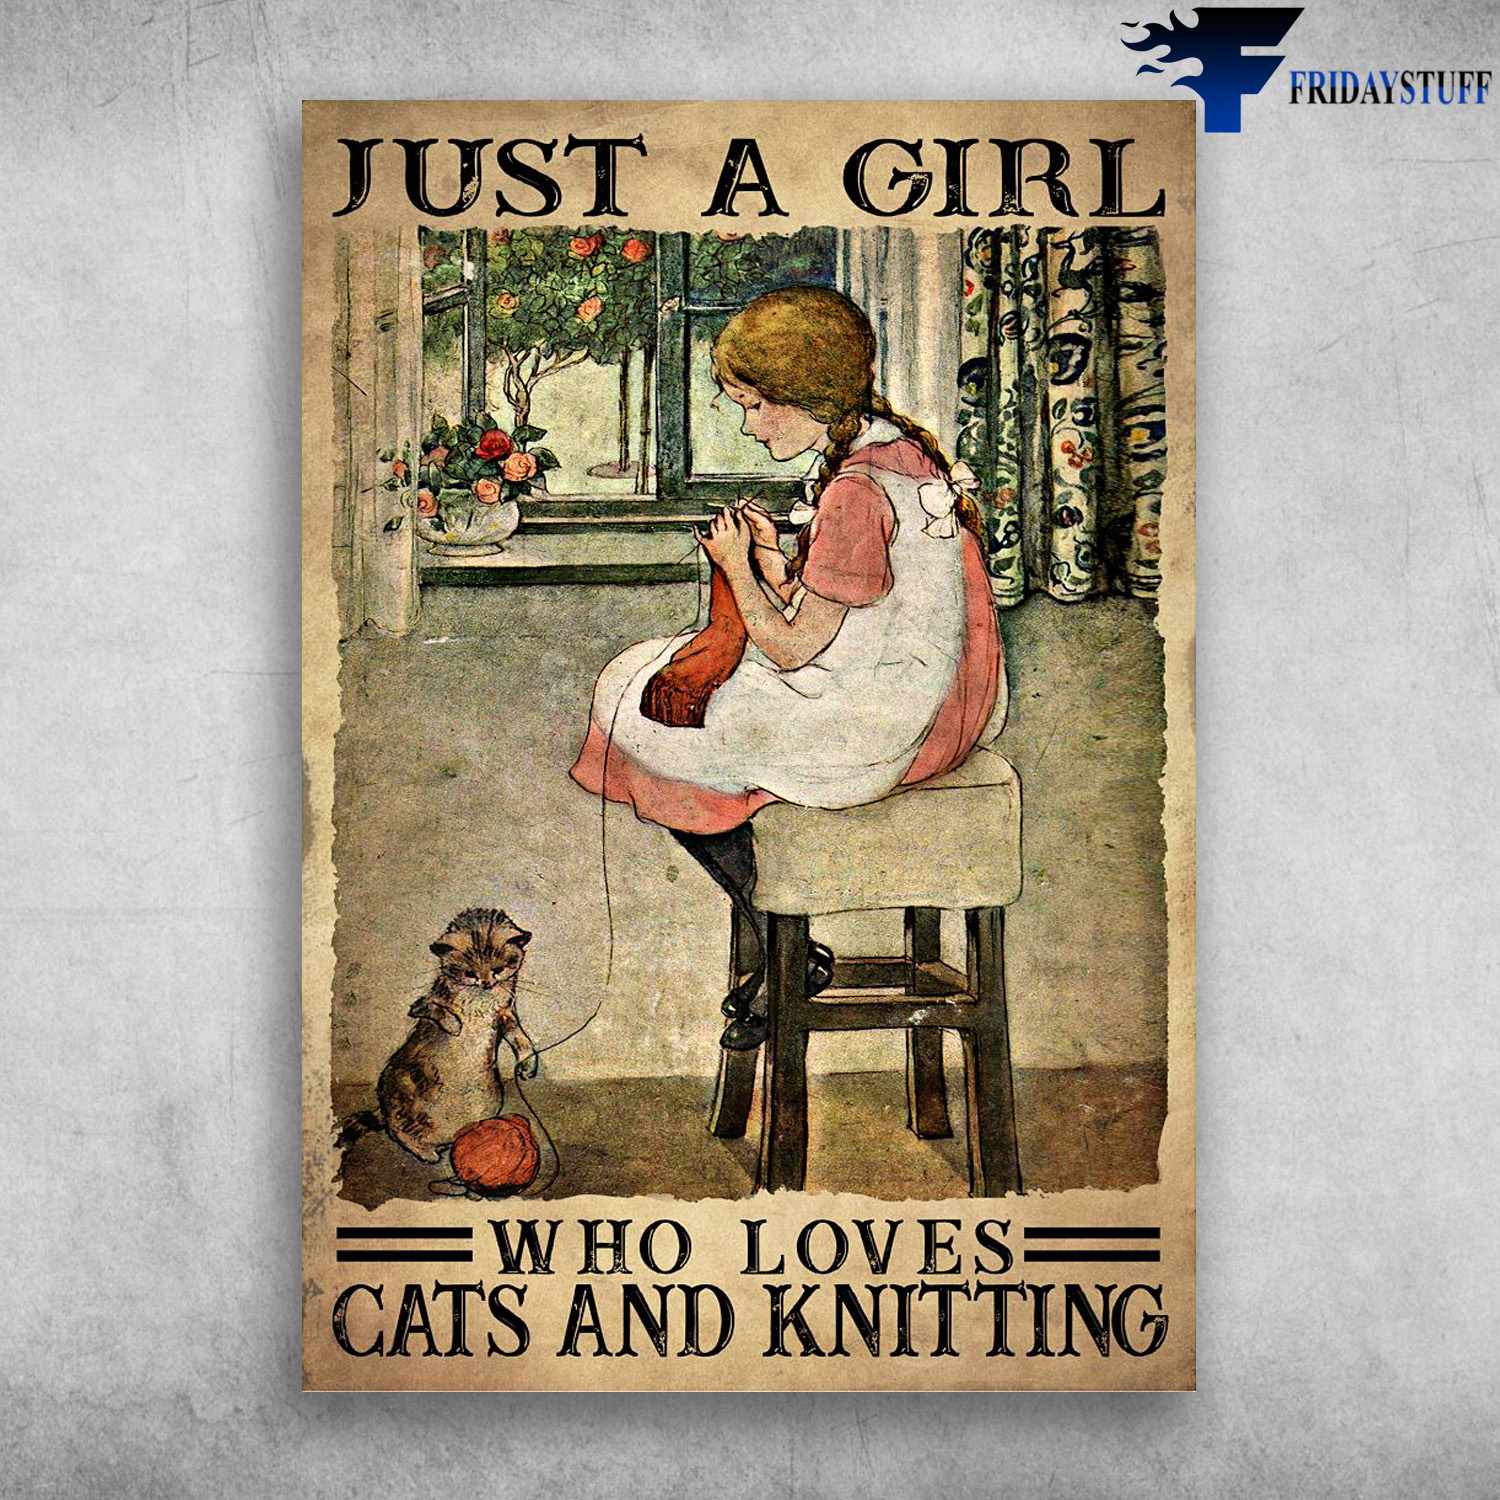 Little Girl Knitting With Cat - Just A Girl, Who Loves Cats And Knitting